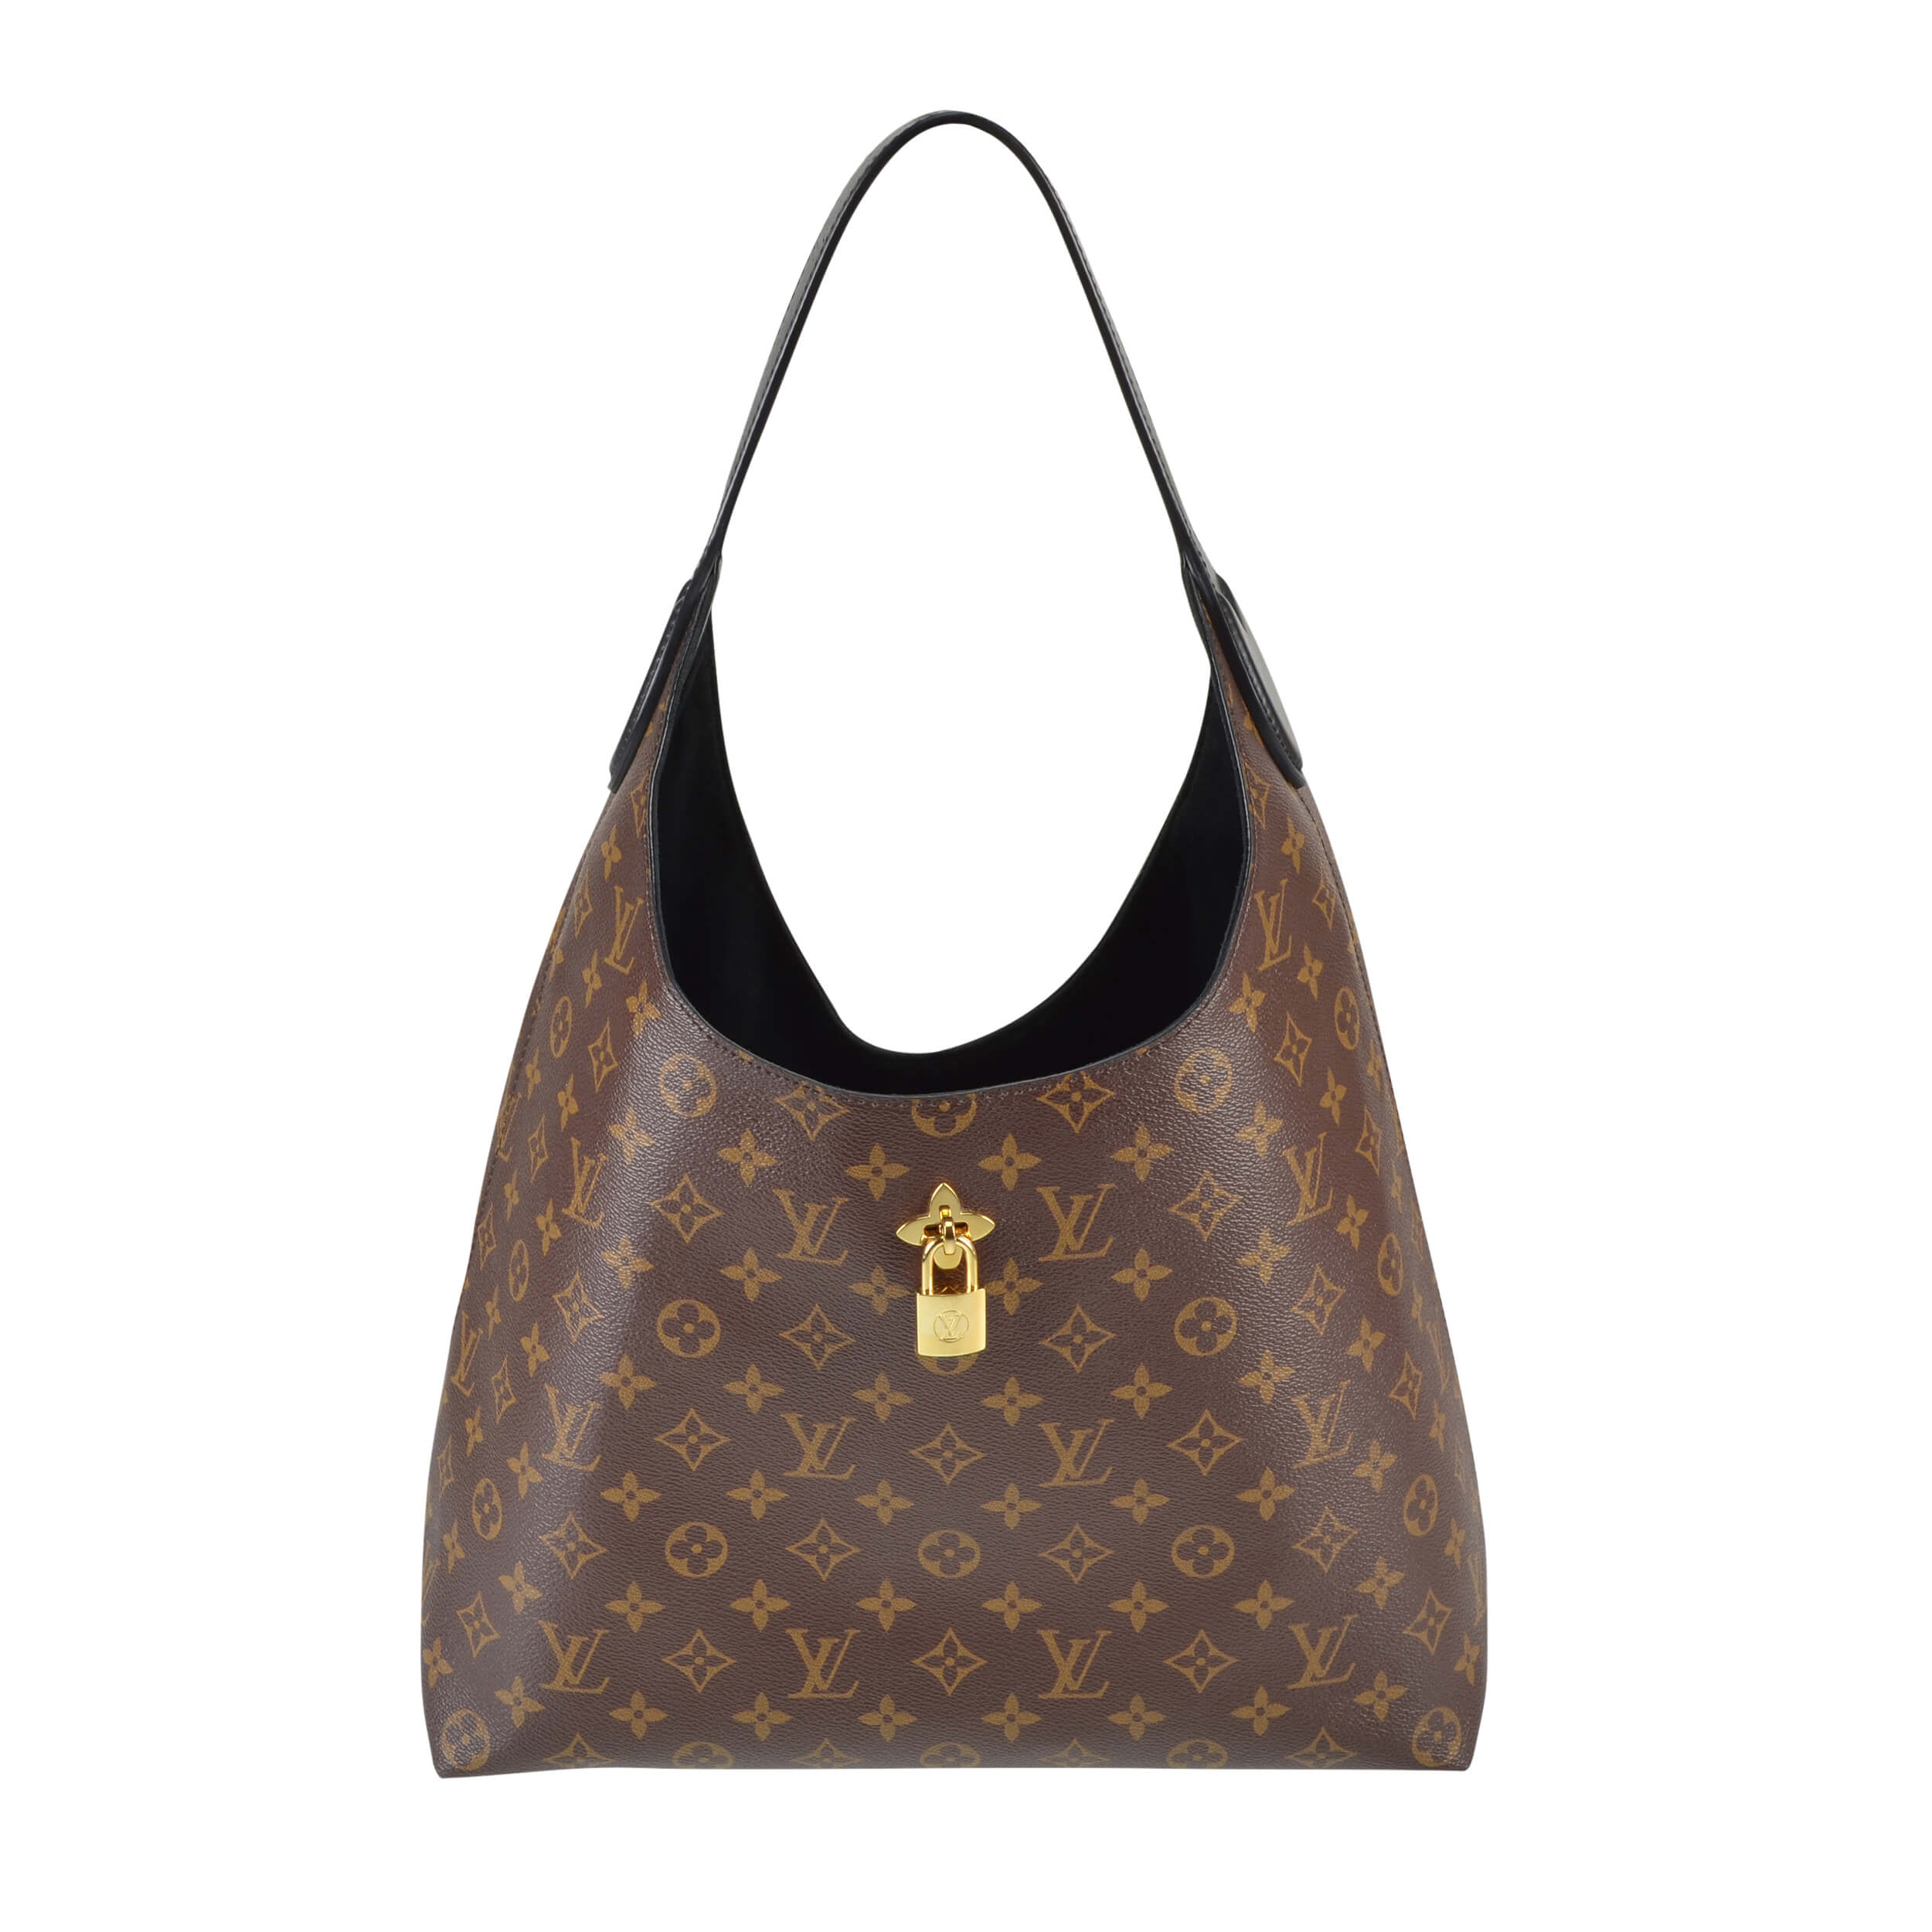 Louis Vuitton Tuileries Hobo Bag Second Hand - MyLovelyBoutique